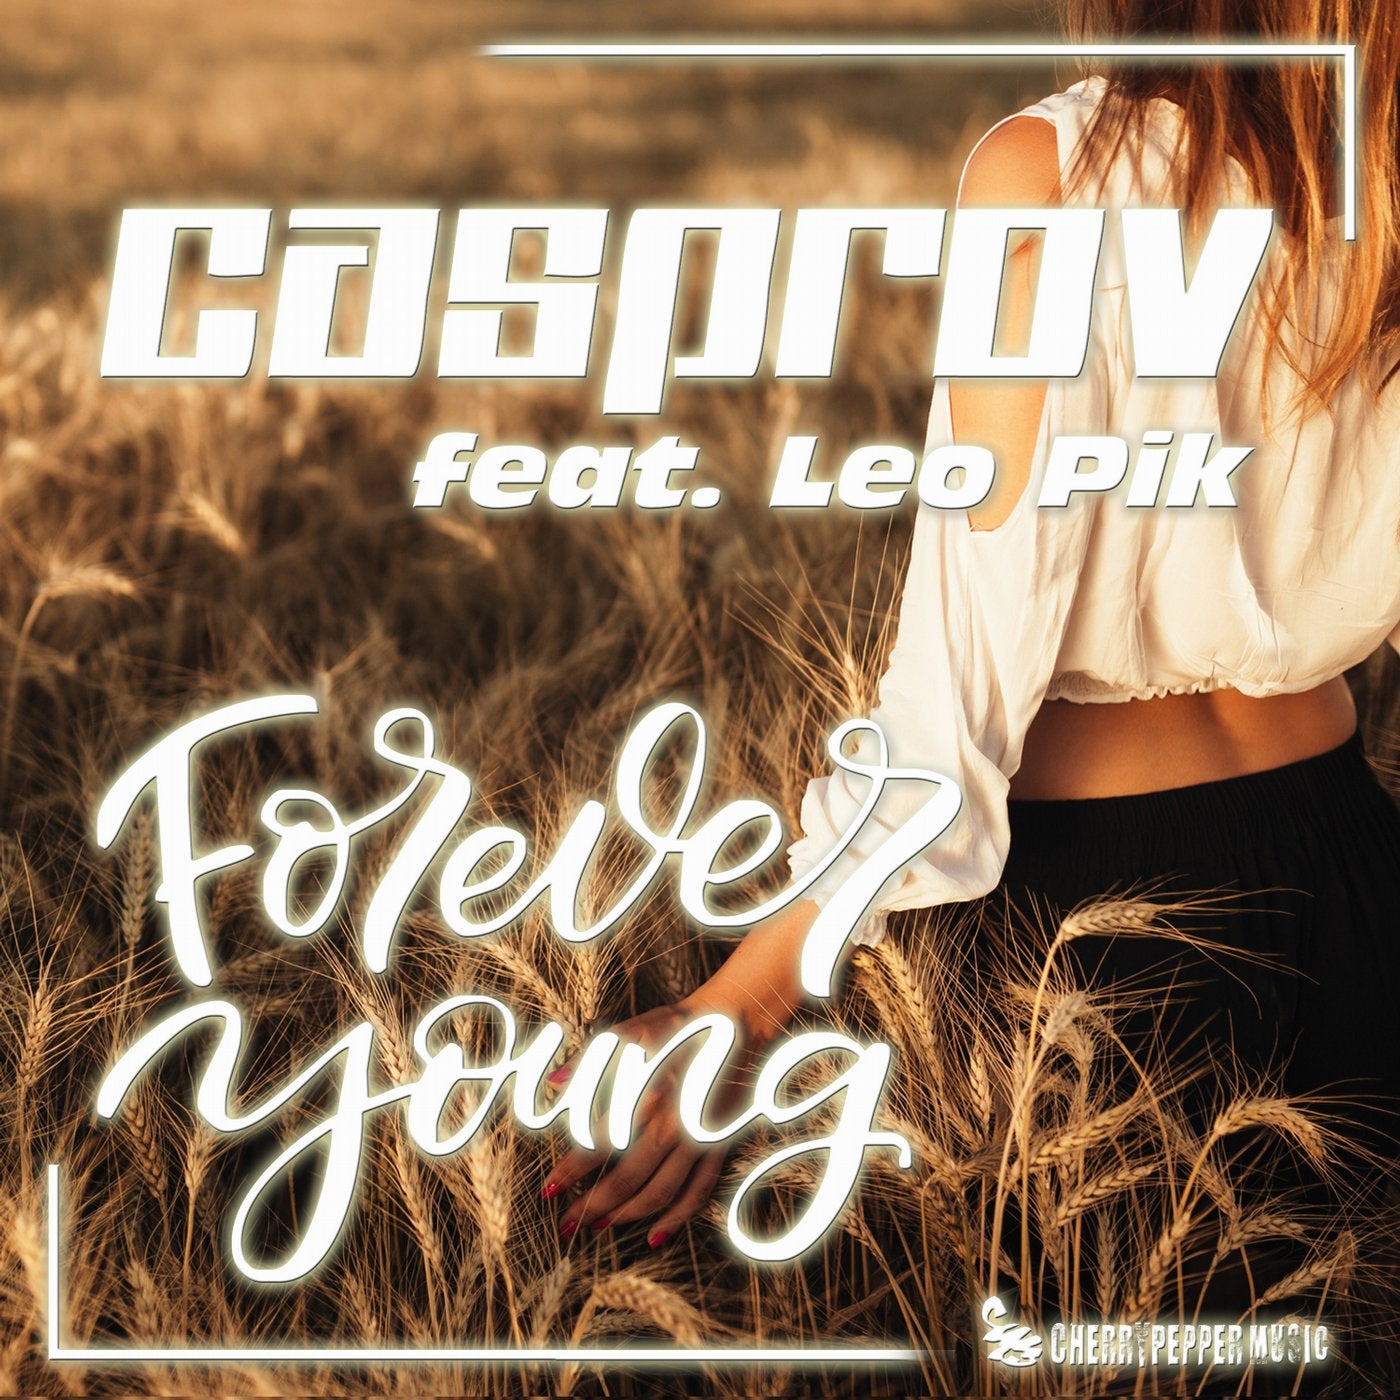 Forever Young (feat. Leo Pik)